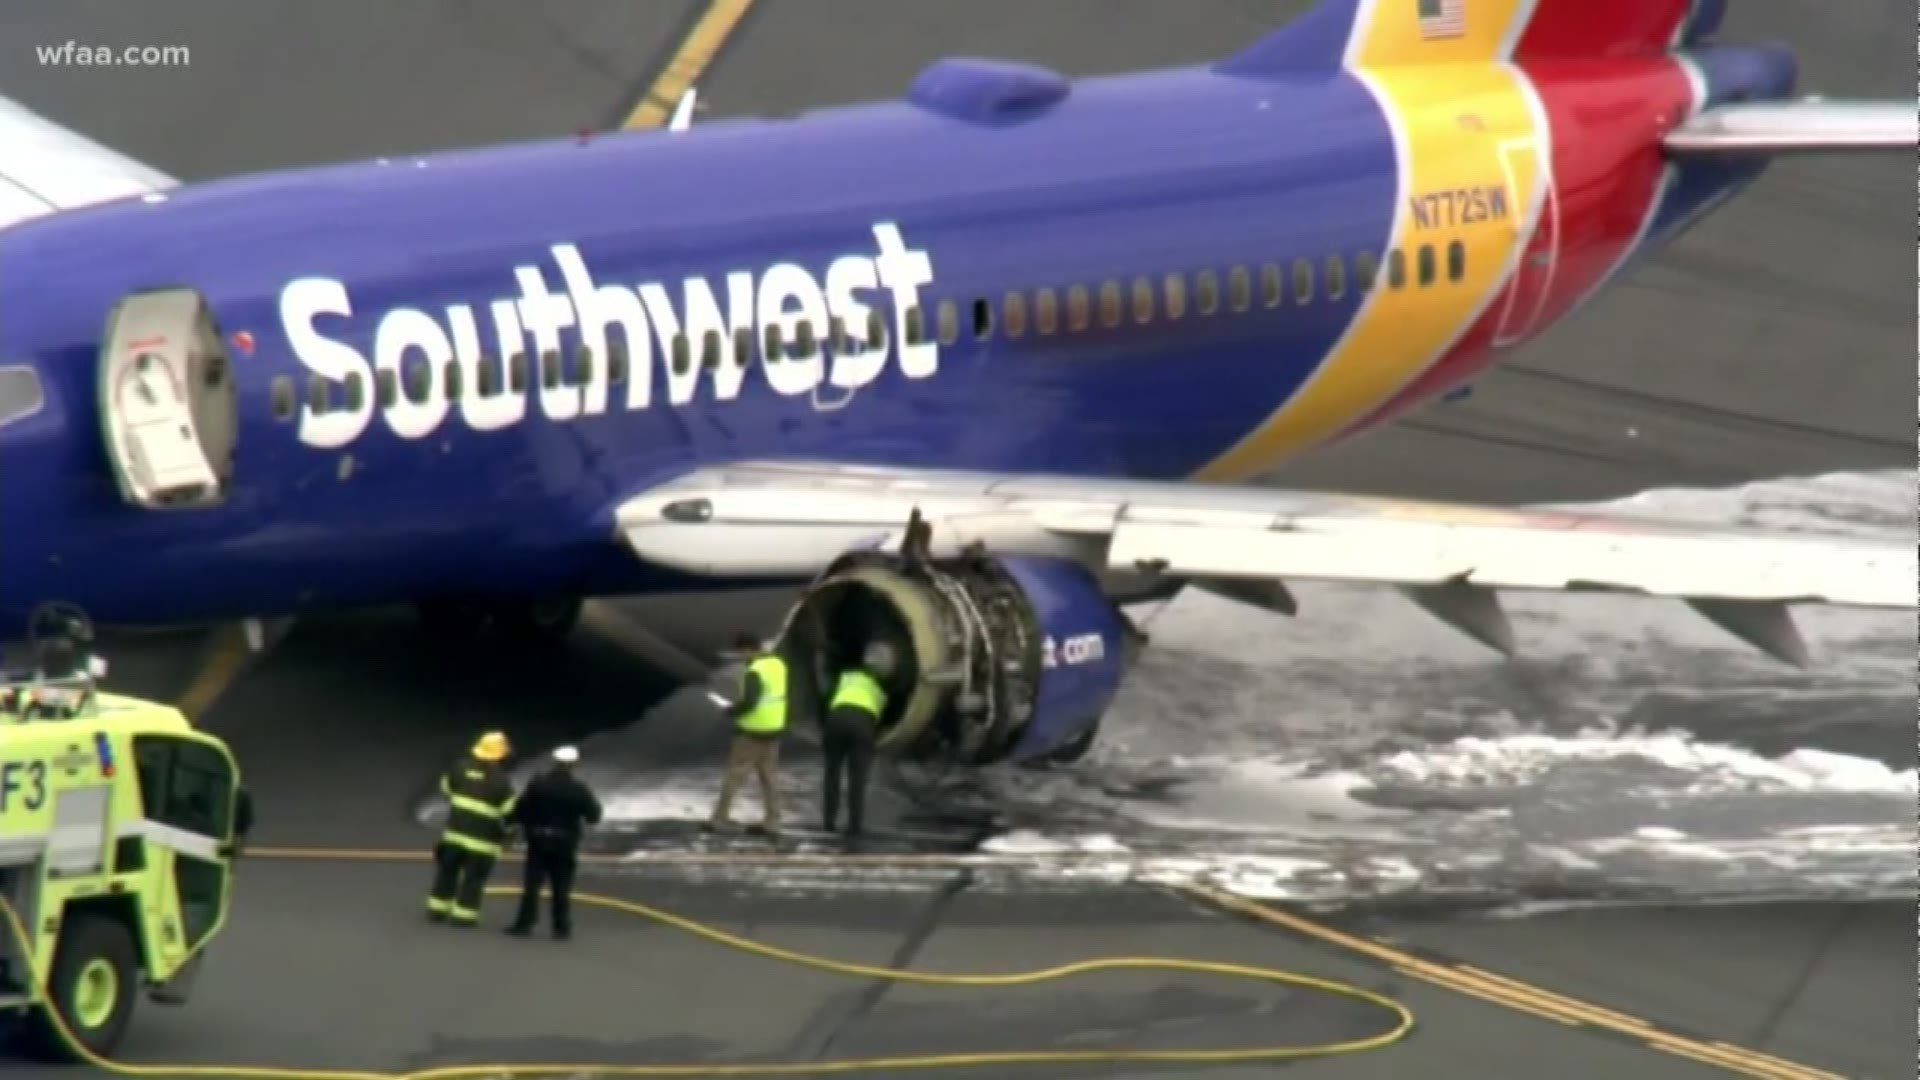 The NTSB is sending a group to Southwest's headquarters in Dallas to look over the airline's maintenance records.